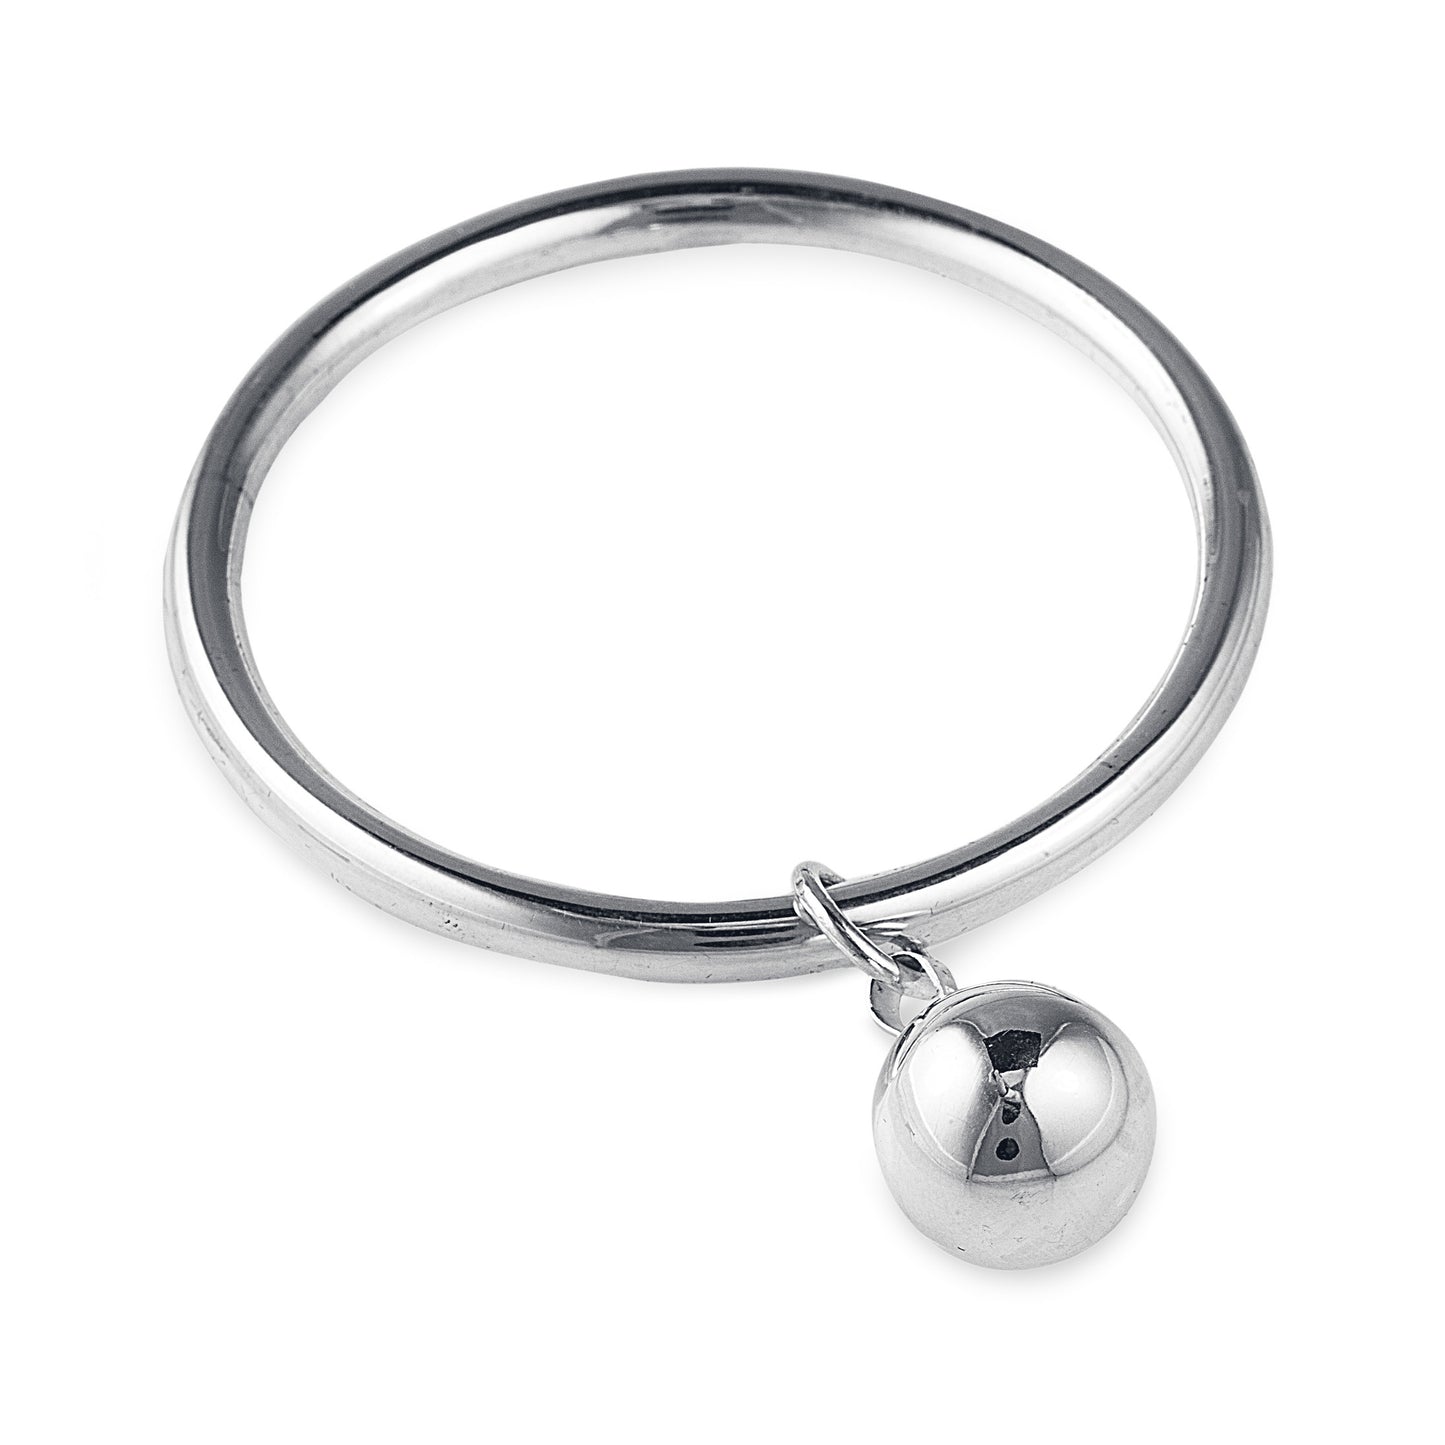 The Luna Bangle is a single classic bangle in 925 sterling silver featuring a large ball charm. The bangle is approximately 6cm in diameter. Luxury jewellery (bracelets, rings, necklaces and earrings) at affordable prices by Bellagio & Co. Worldwide Shipping plus FREE shipping for orders over $150 in Australia.